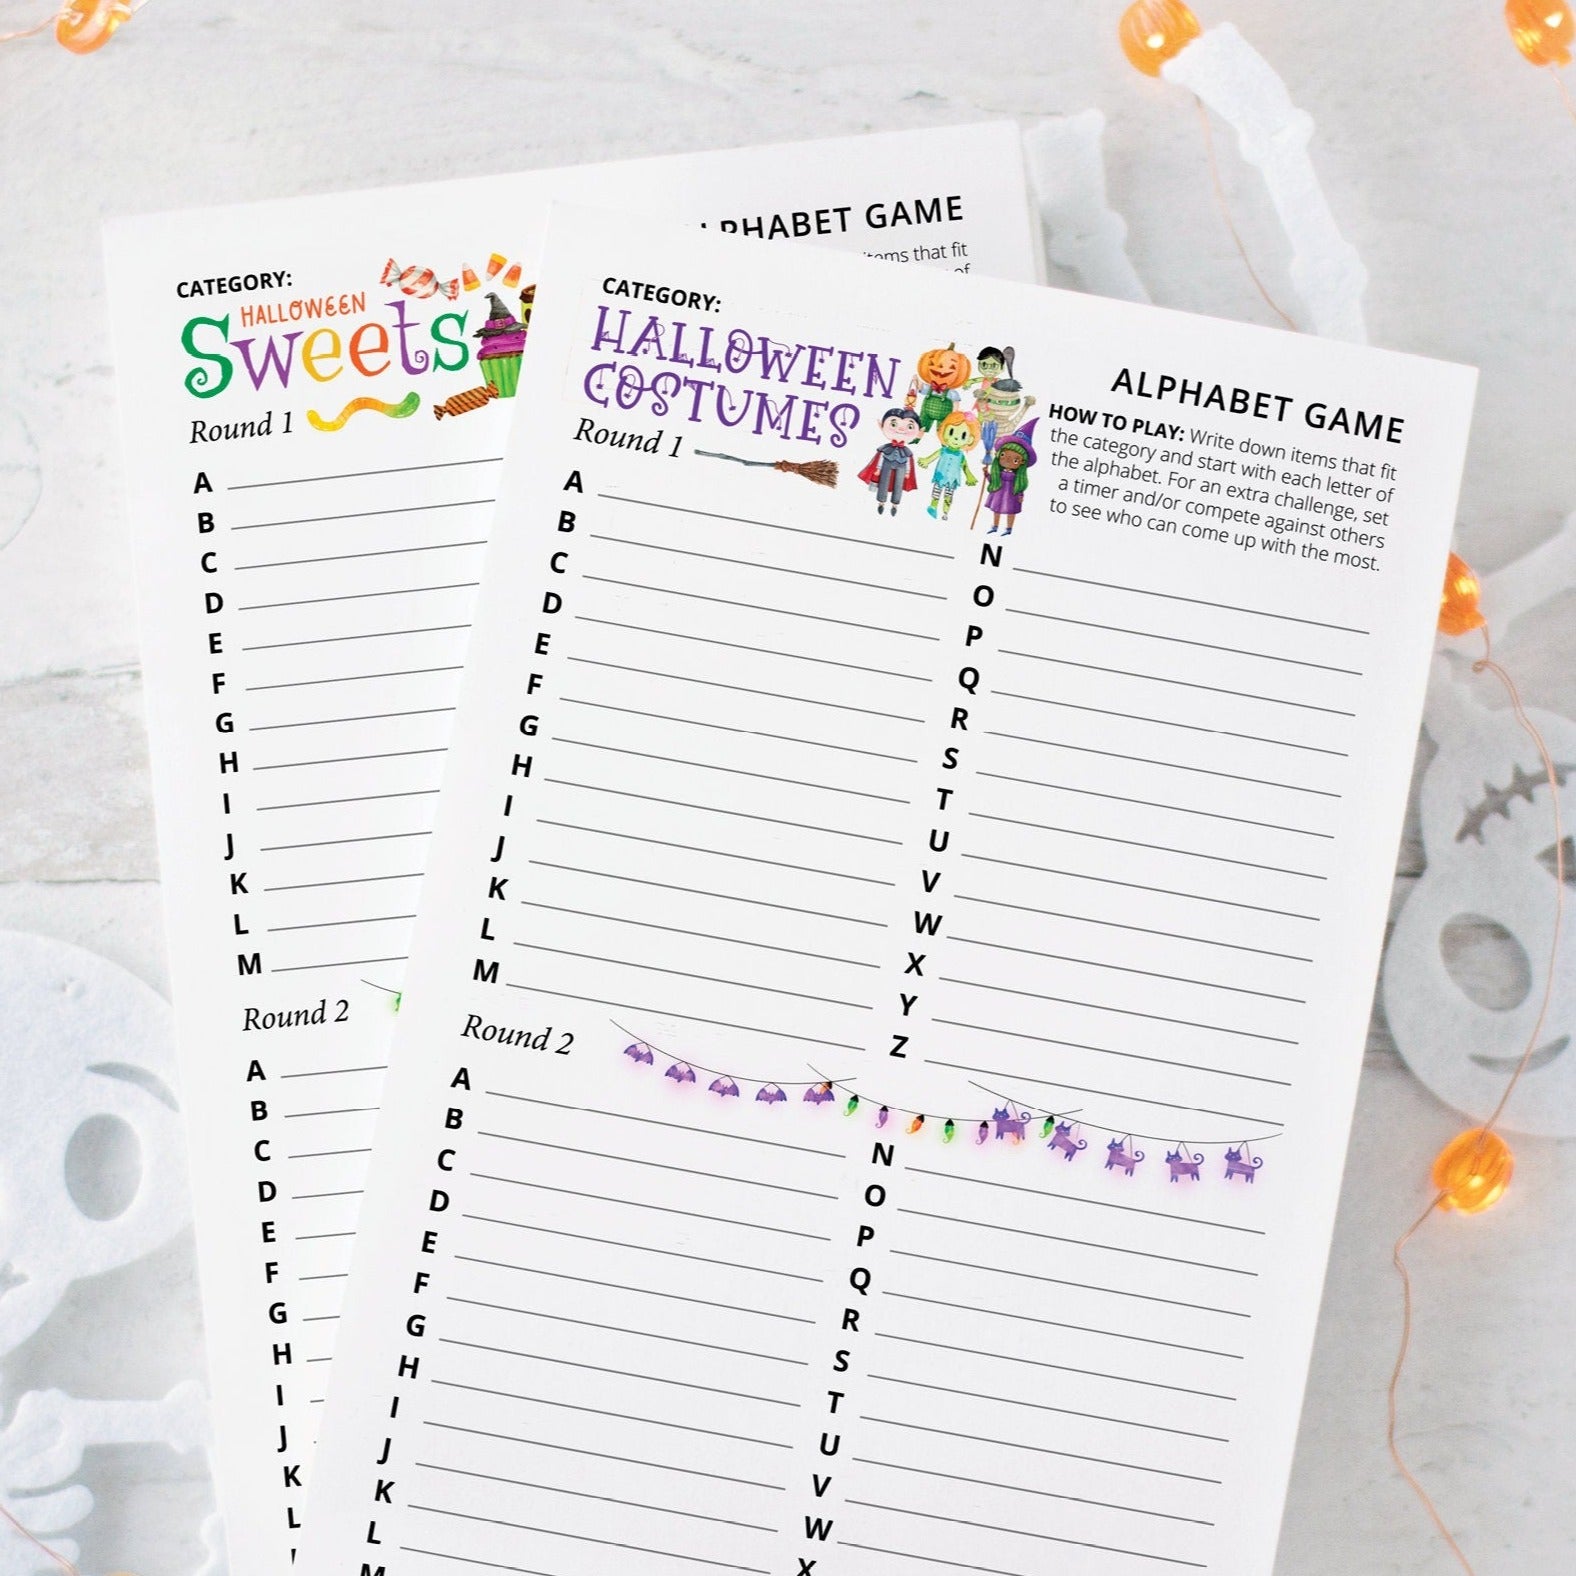 Halloween Alphabet Game 4-Pack - PRINTABLE downloadable activity. Cute, fun word games for guests, adults & older kids. Colorful artwork.